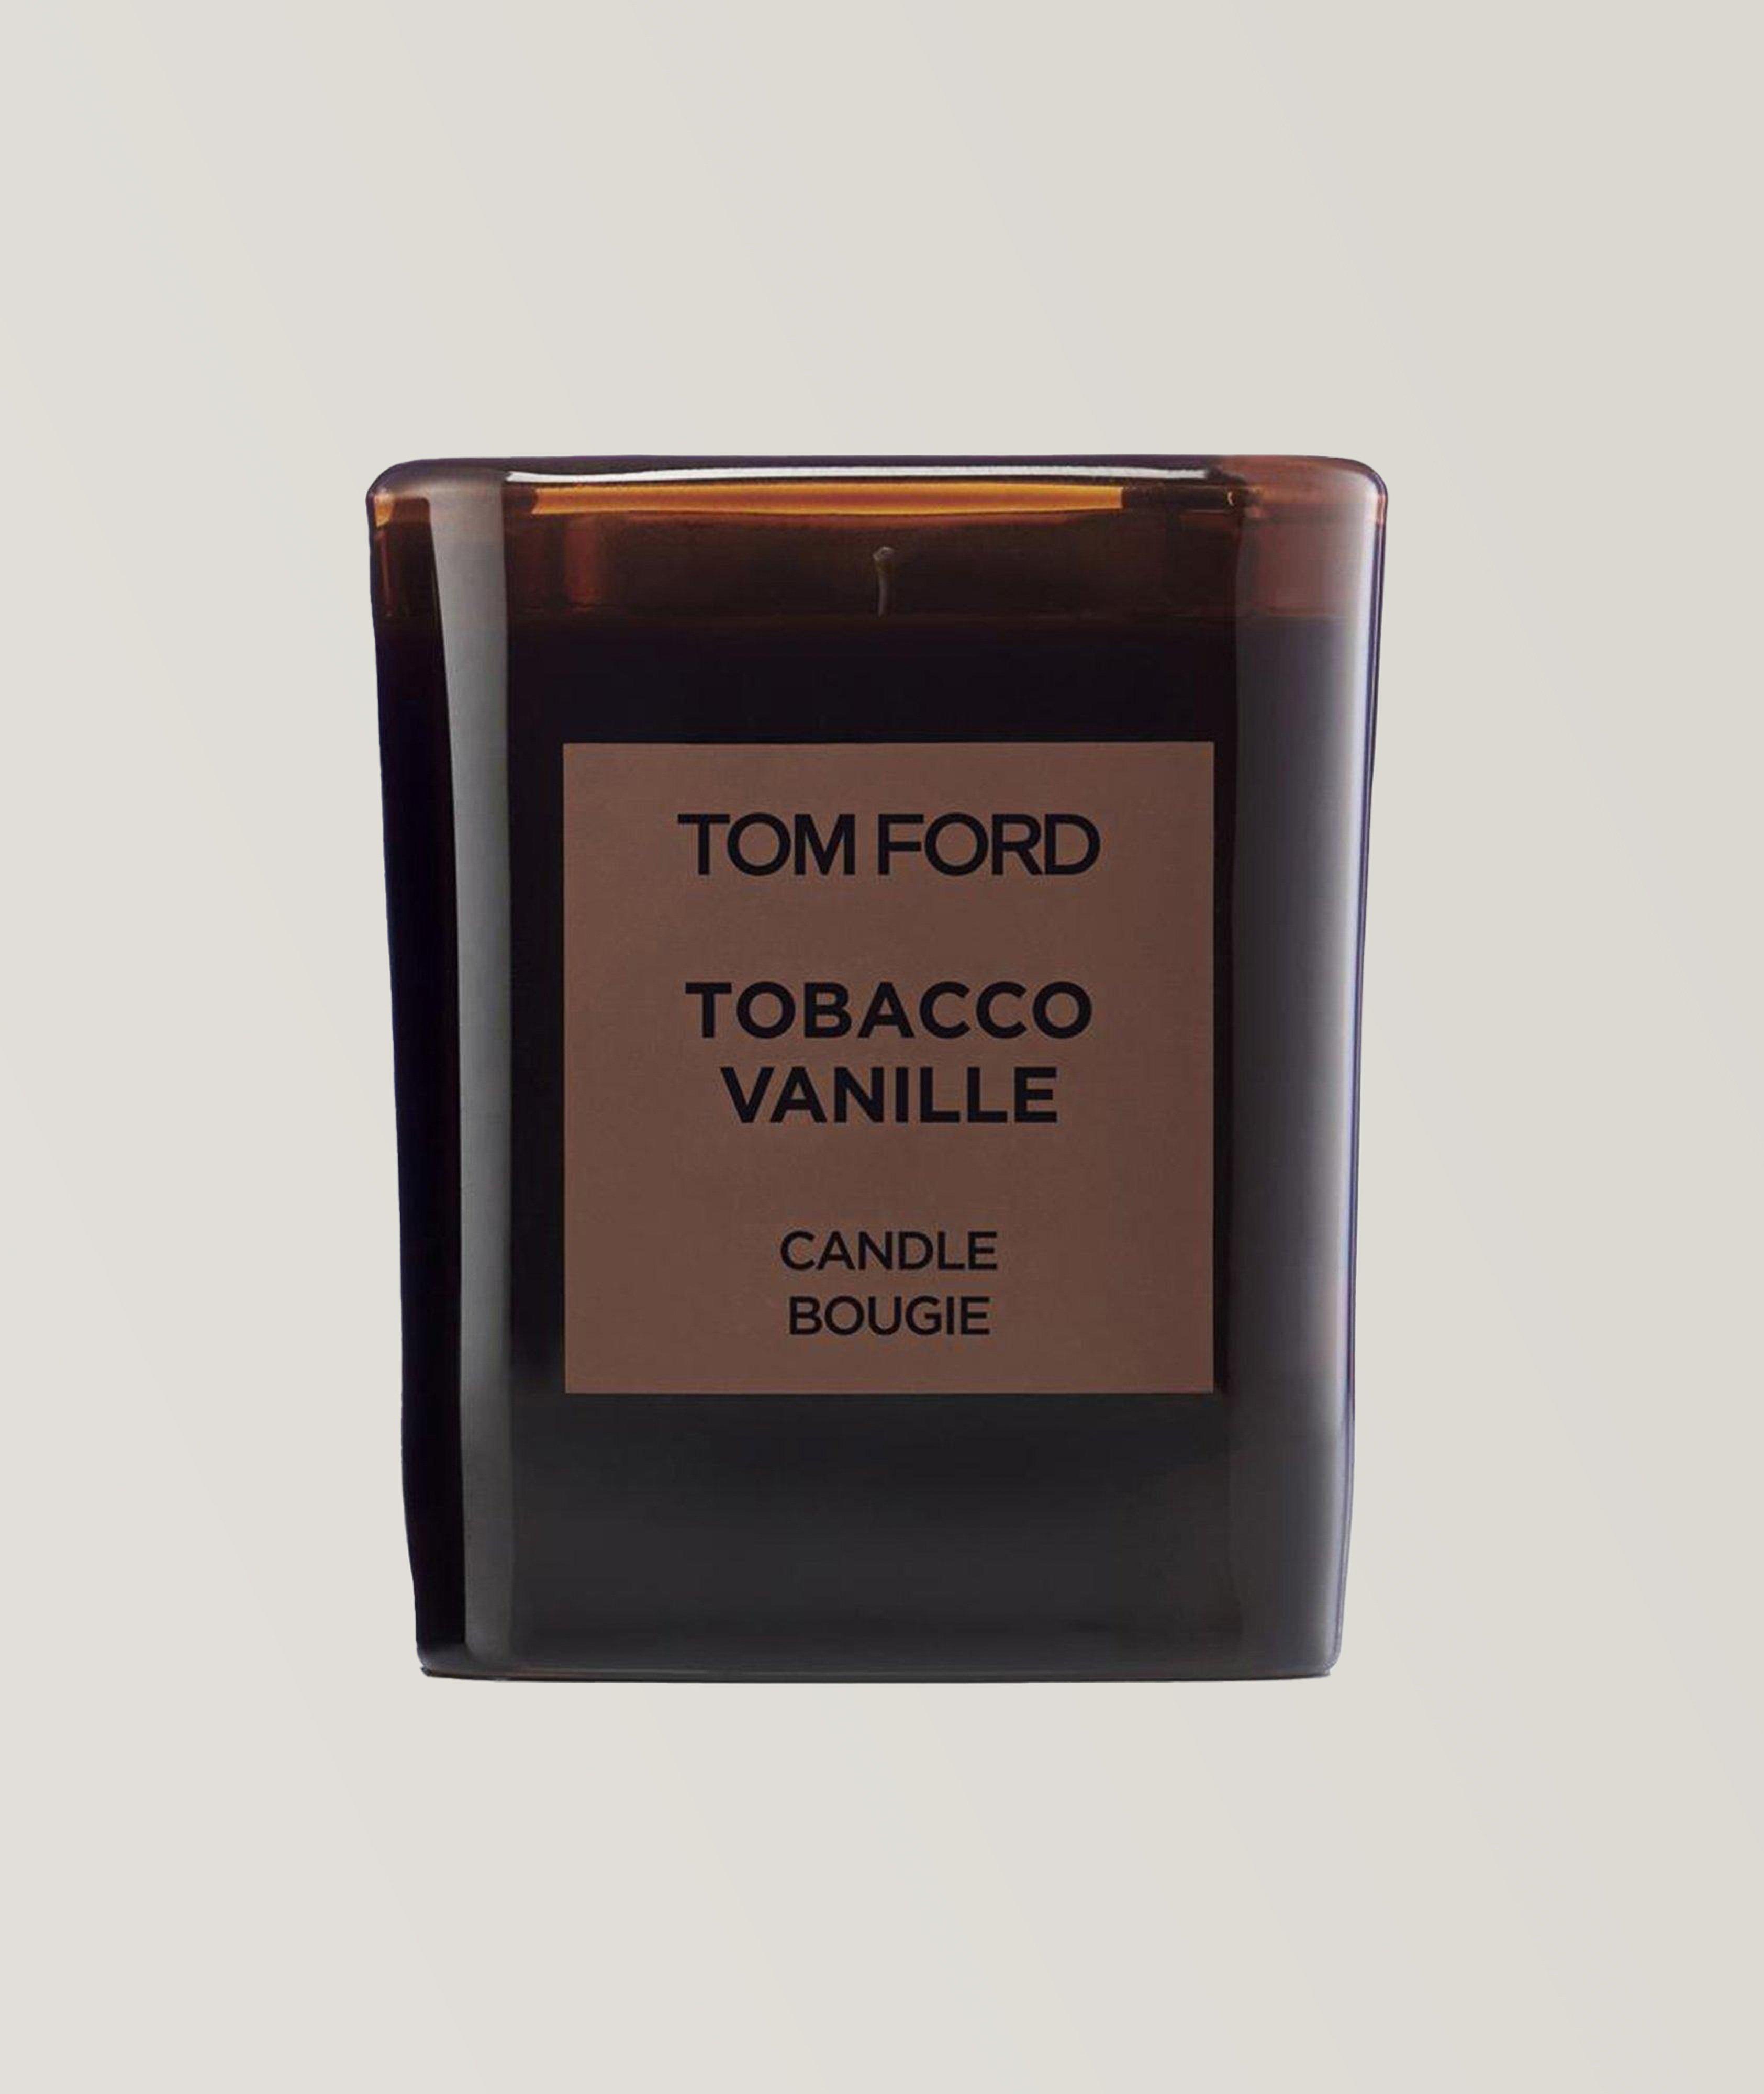 Tobacco Vanille Candle image 0